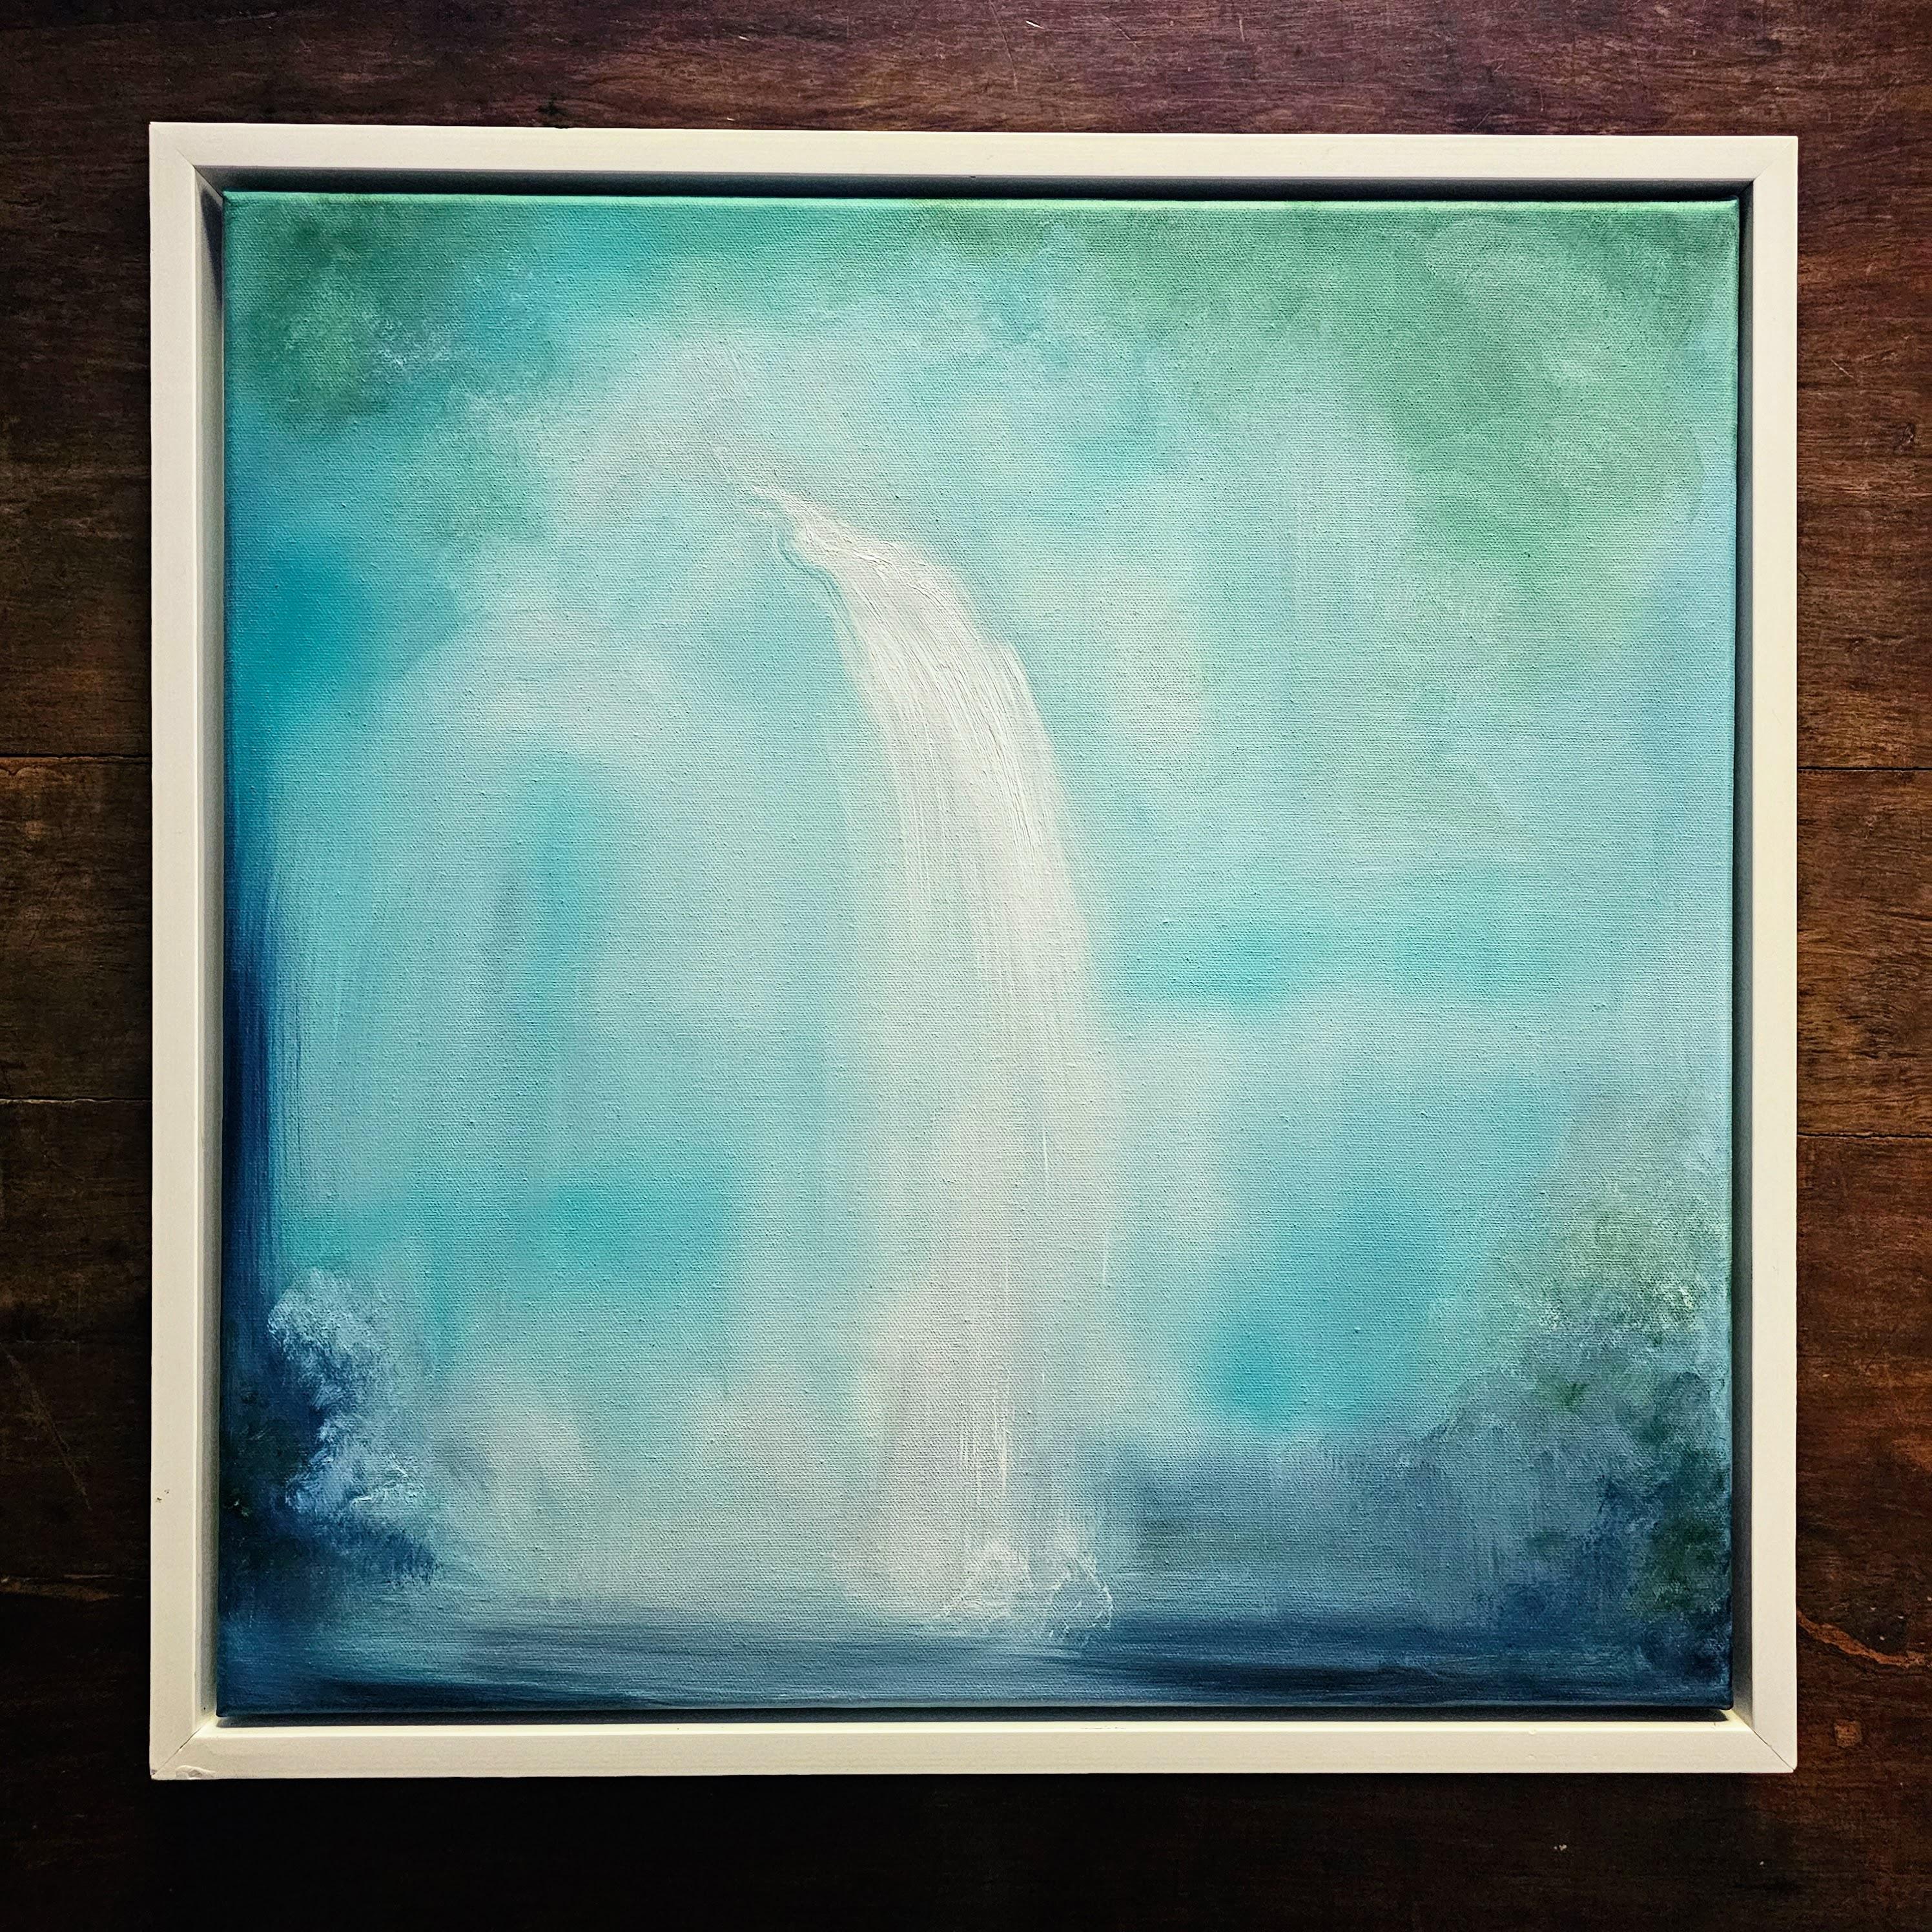 Wellspring - Green, blue and yellow abstract water landscape - Painting by Jennifer L. Baker